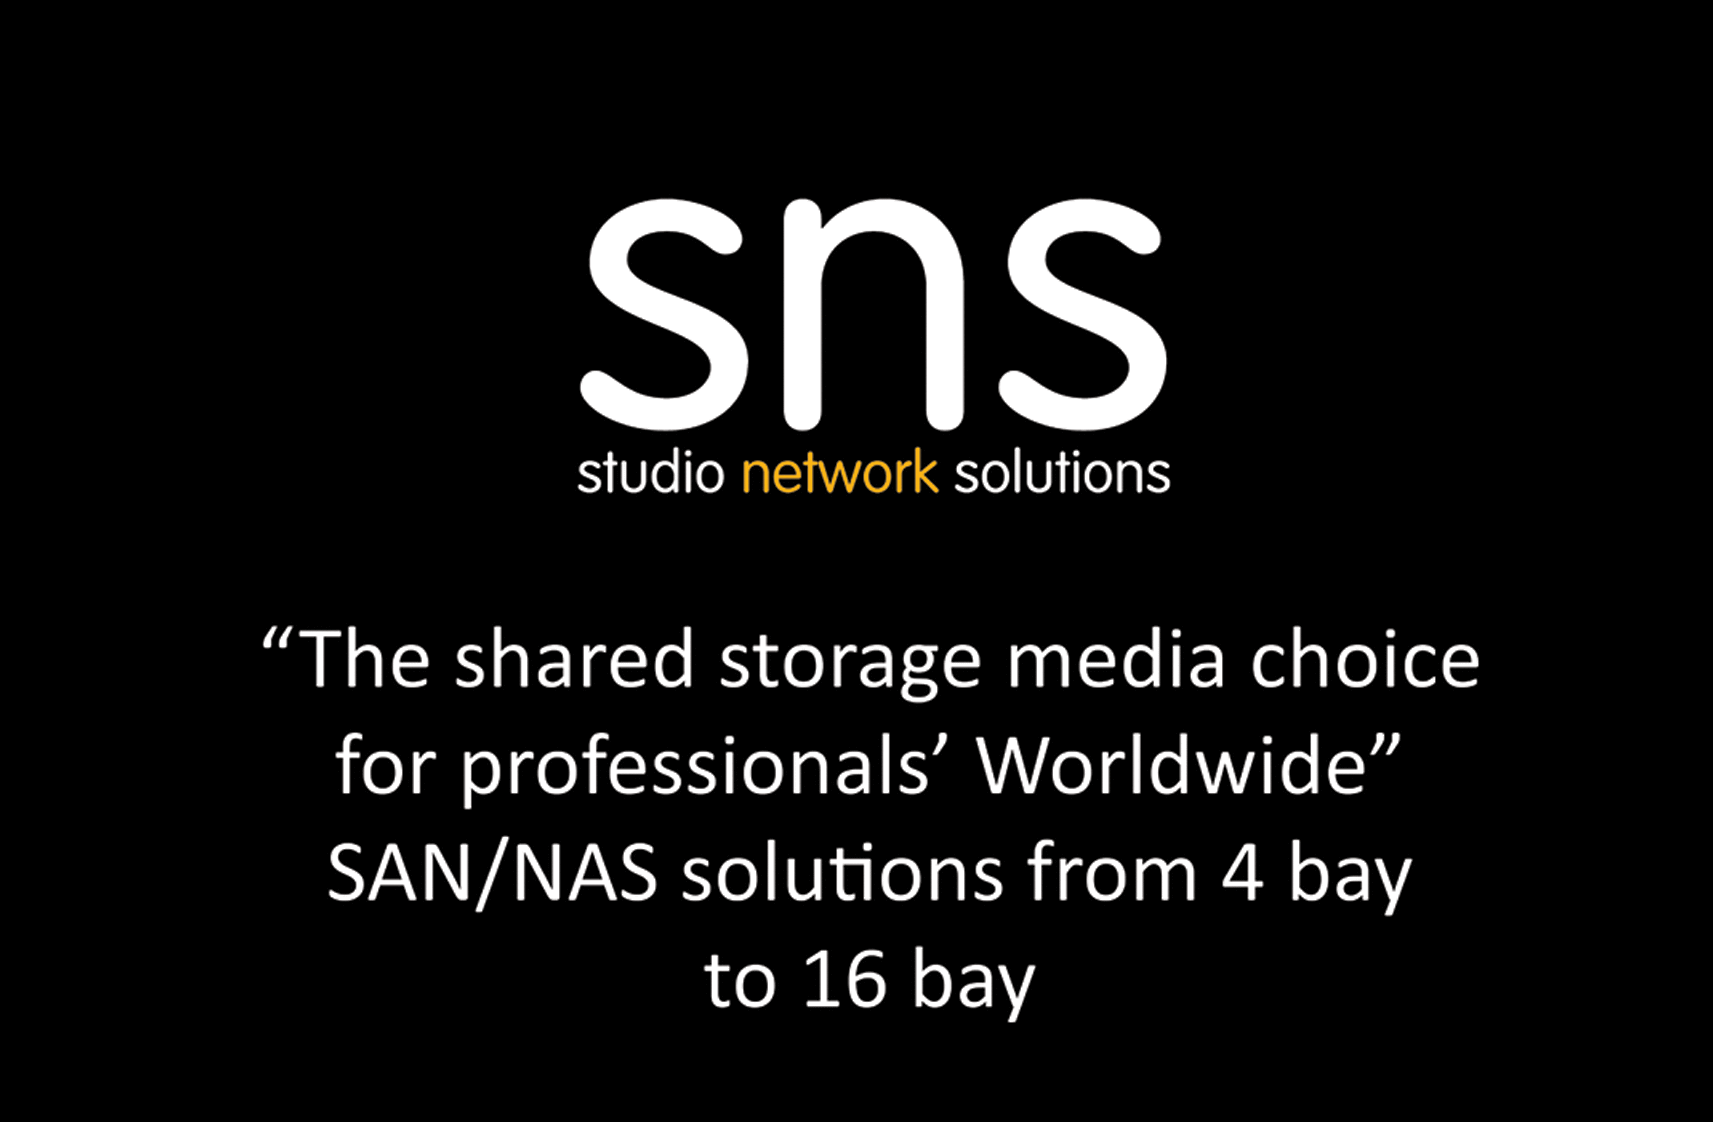 Plan Your Visit to BVE 2018: What To See: Studio Network Solutions (SNS)